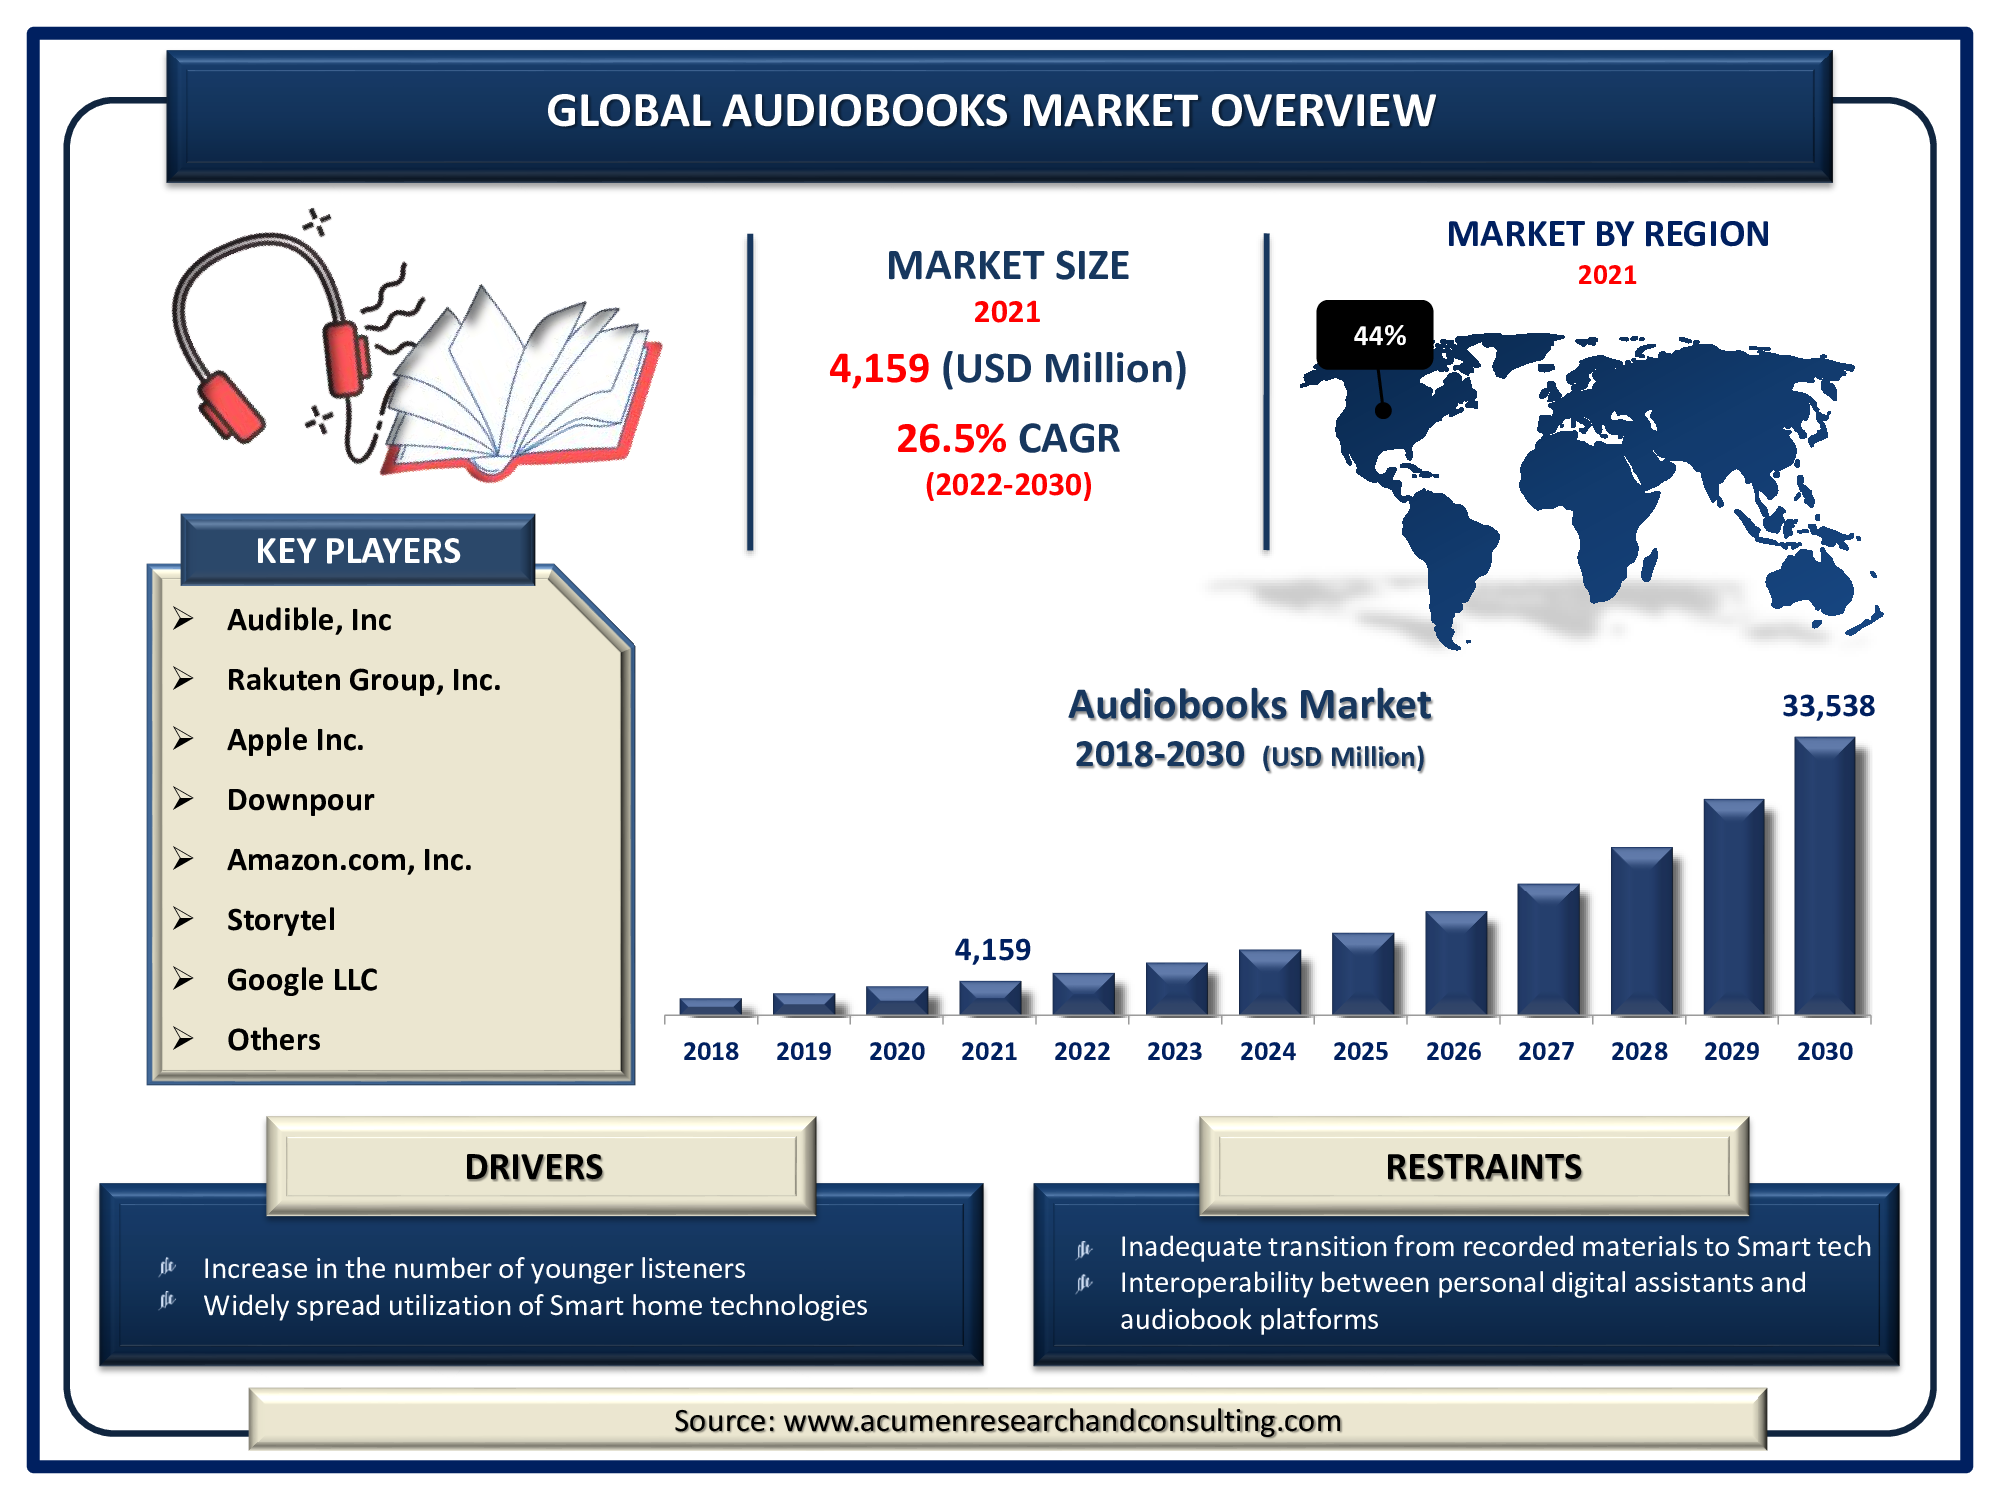 Audiobooks Market size Accounted for USD 4,159 Million in 2021 and is predicted to be worth USD 33,538 Million by 2030, with a CAGR of 26.5% during the Forthcoming Period from 2022 to 2030.